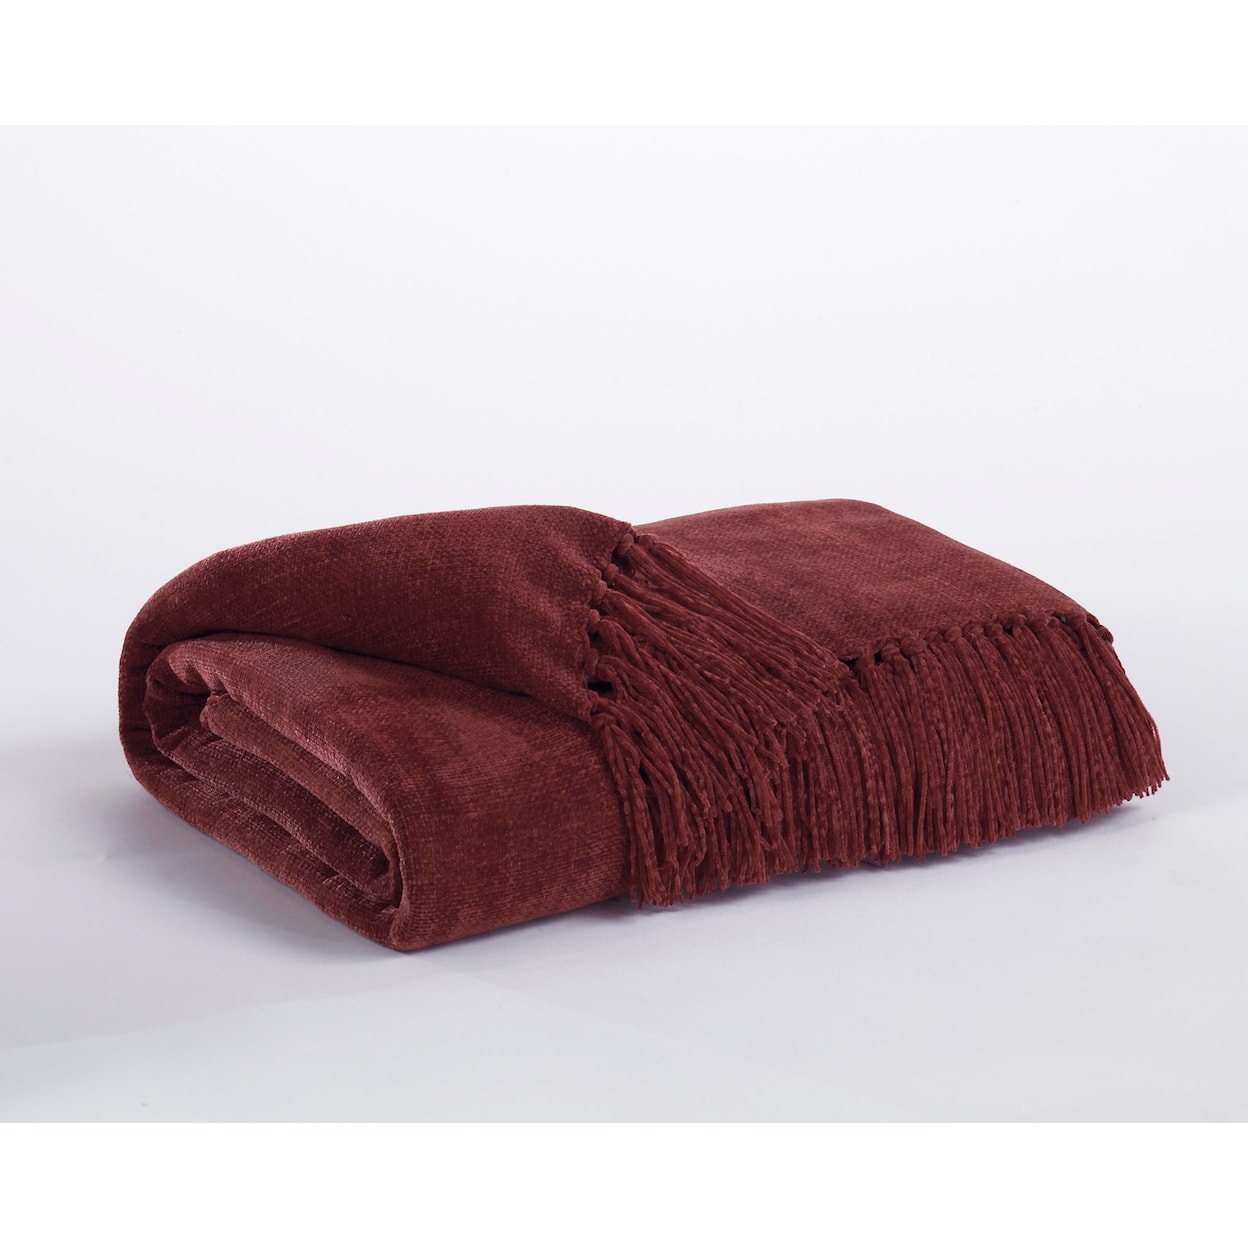 Signature Design by Ashley Furniture Throws Revere - Burgundy Throw